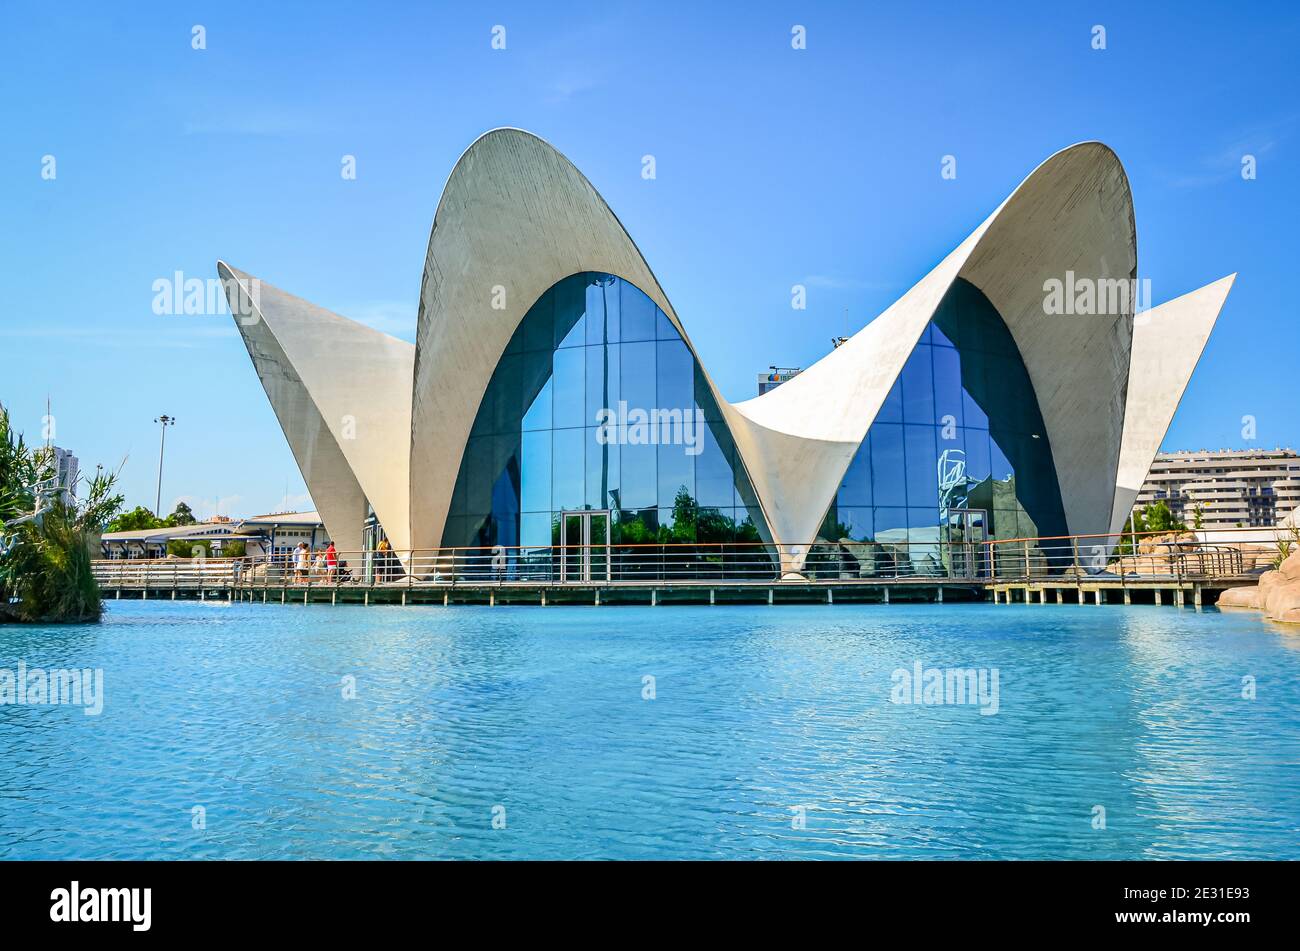 The Oceanographic, Valence, Espagne Banque D'Images